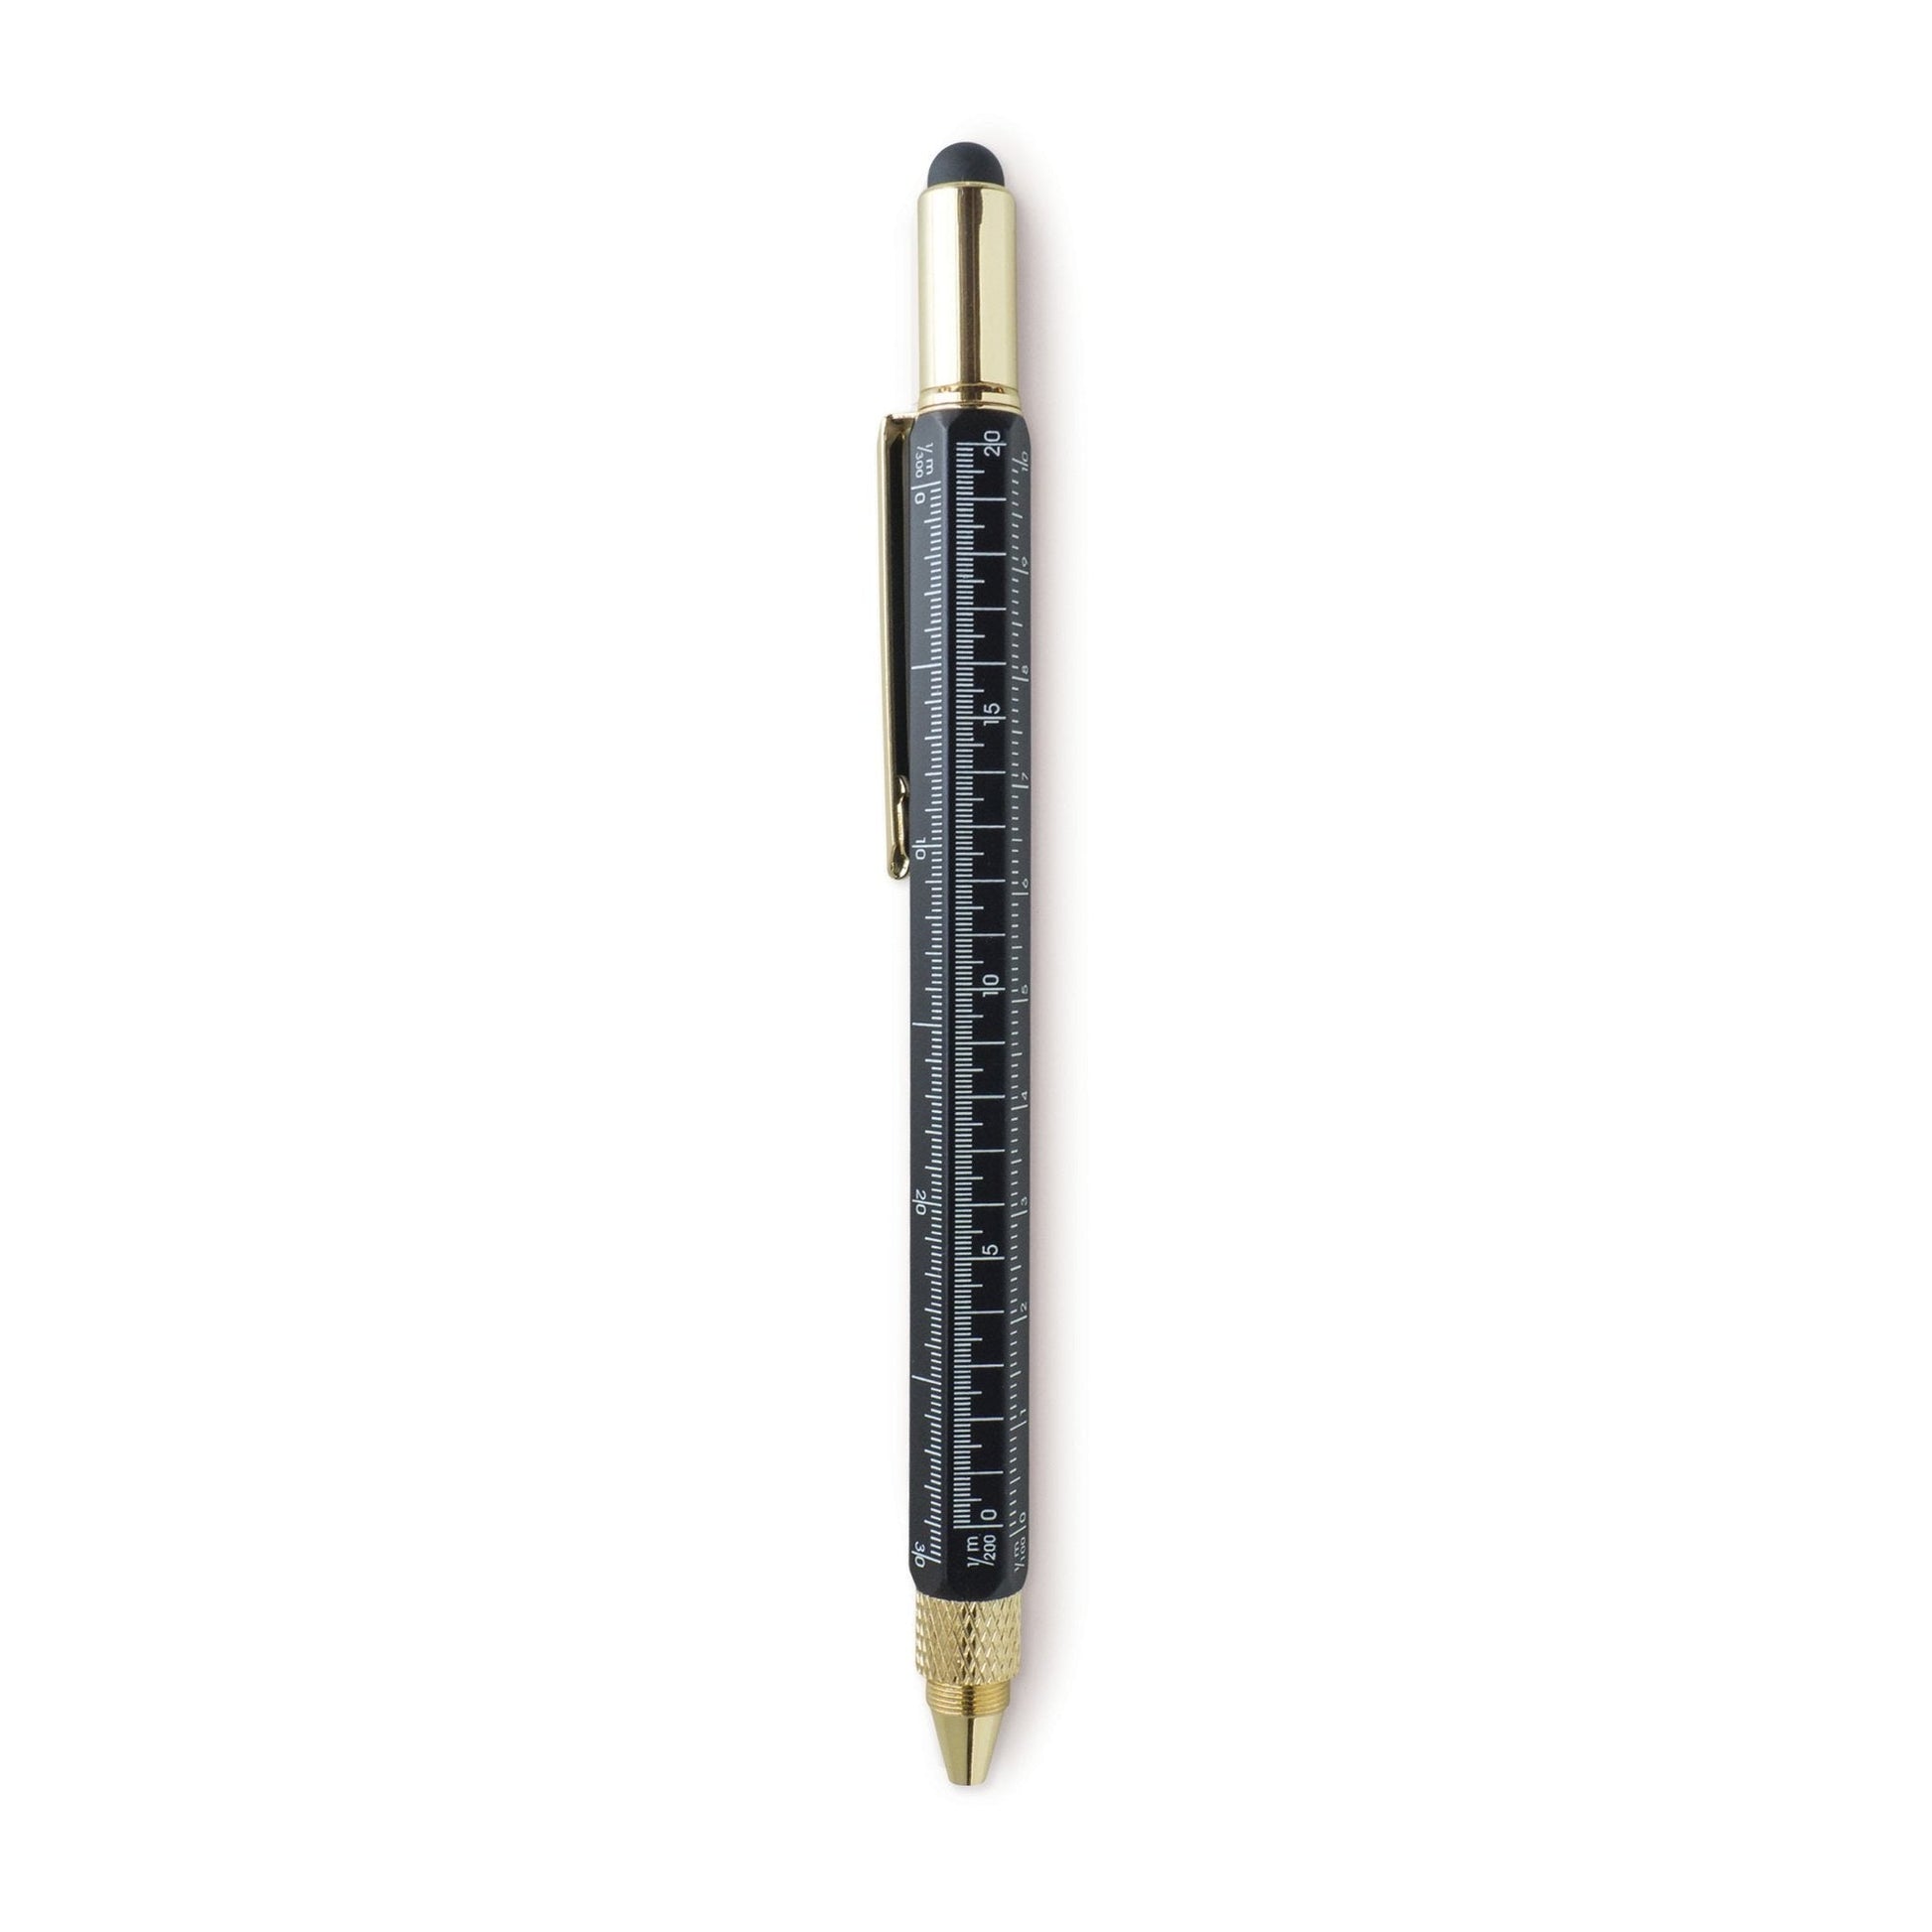 Black tool multi function tool pen from the Pencil Me In stationery shop